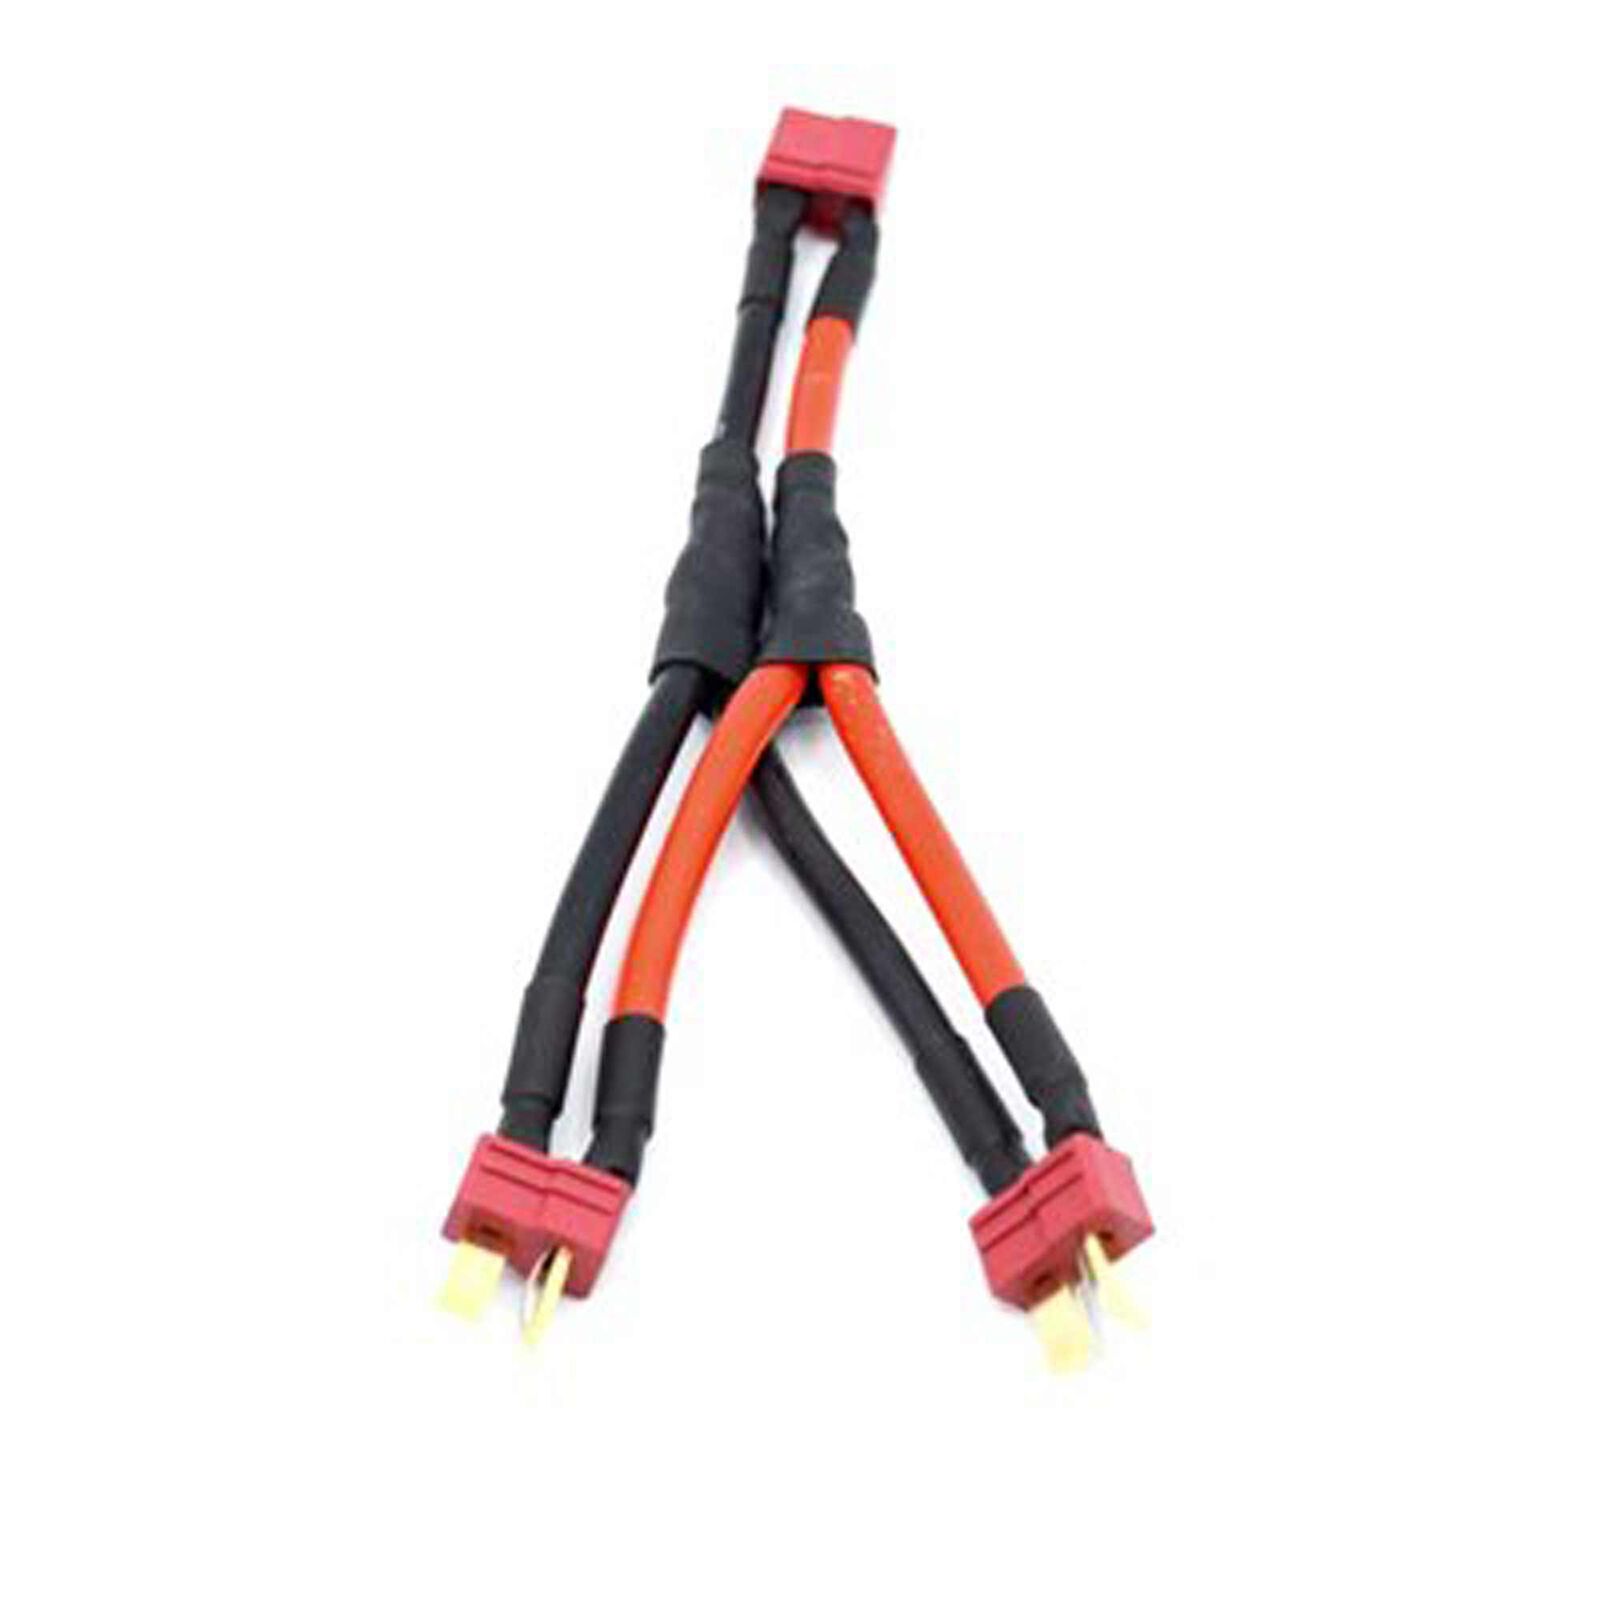 Parallel Wire Harness T-plug